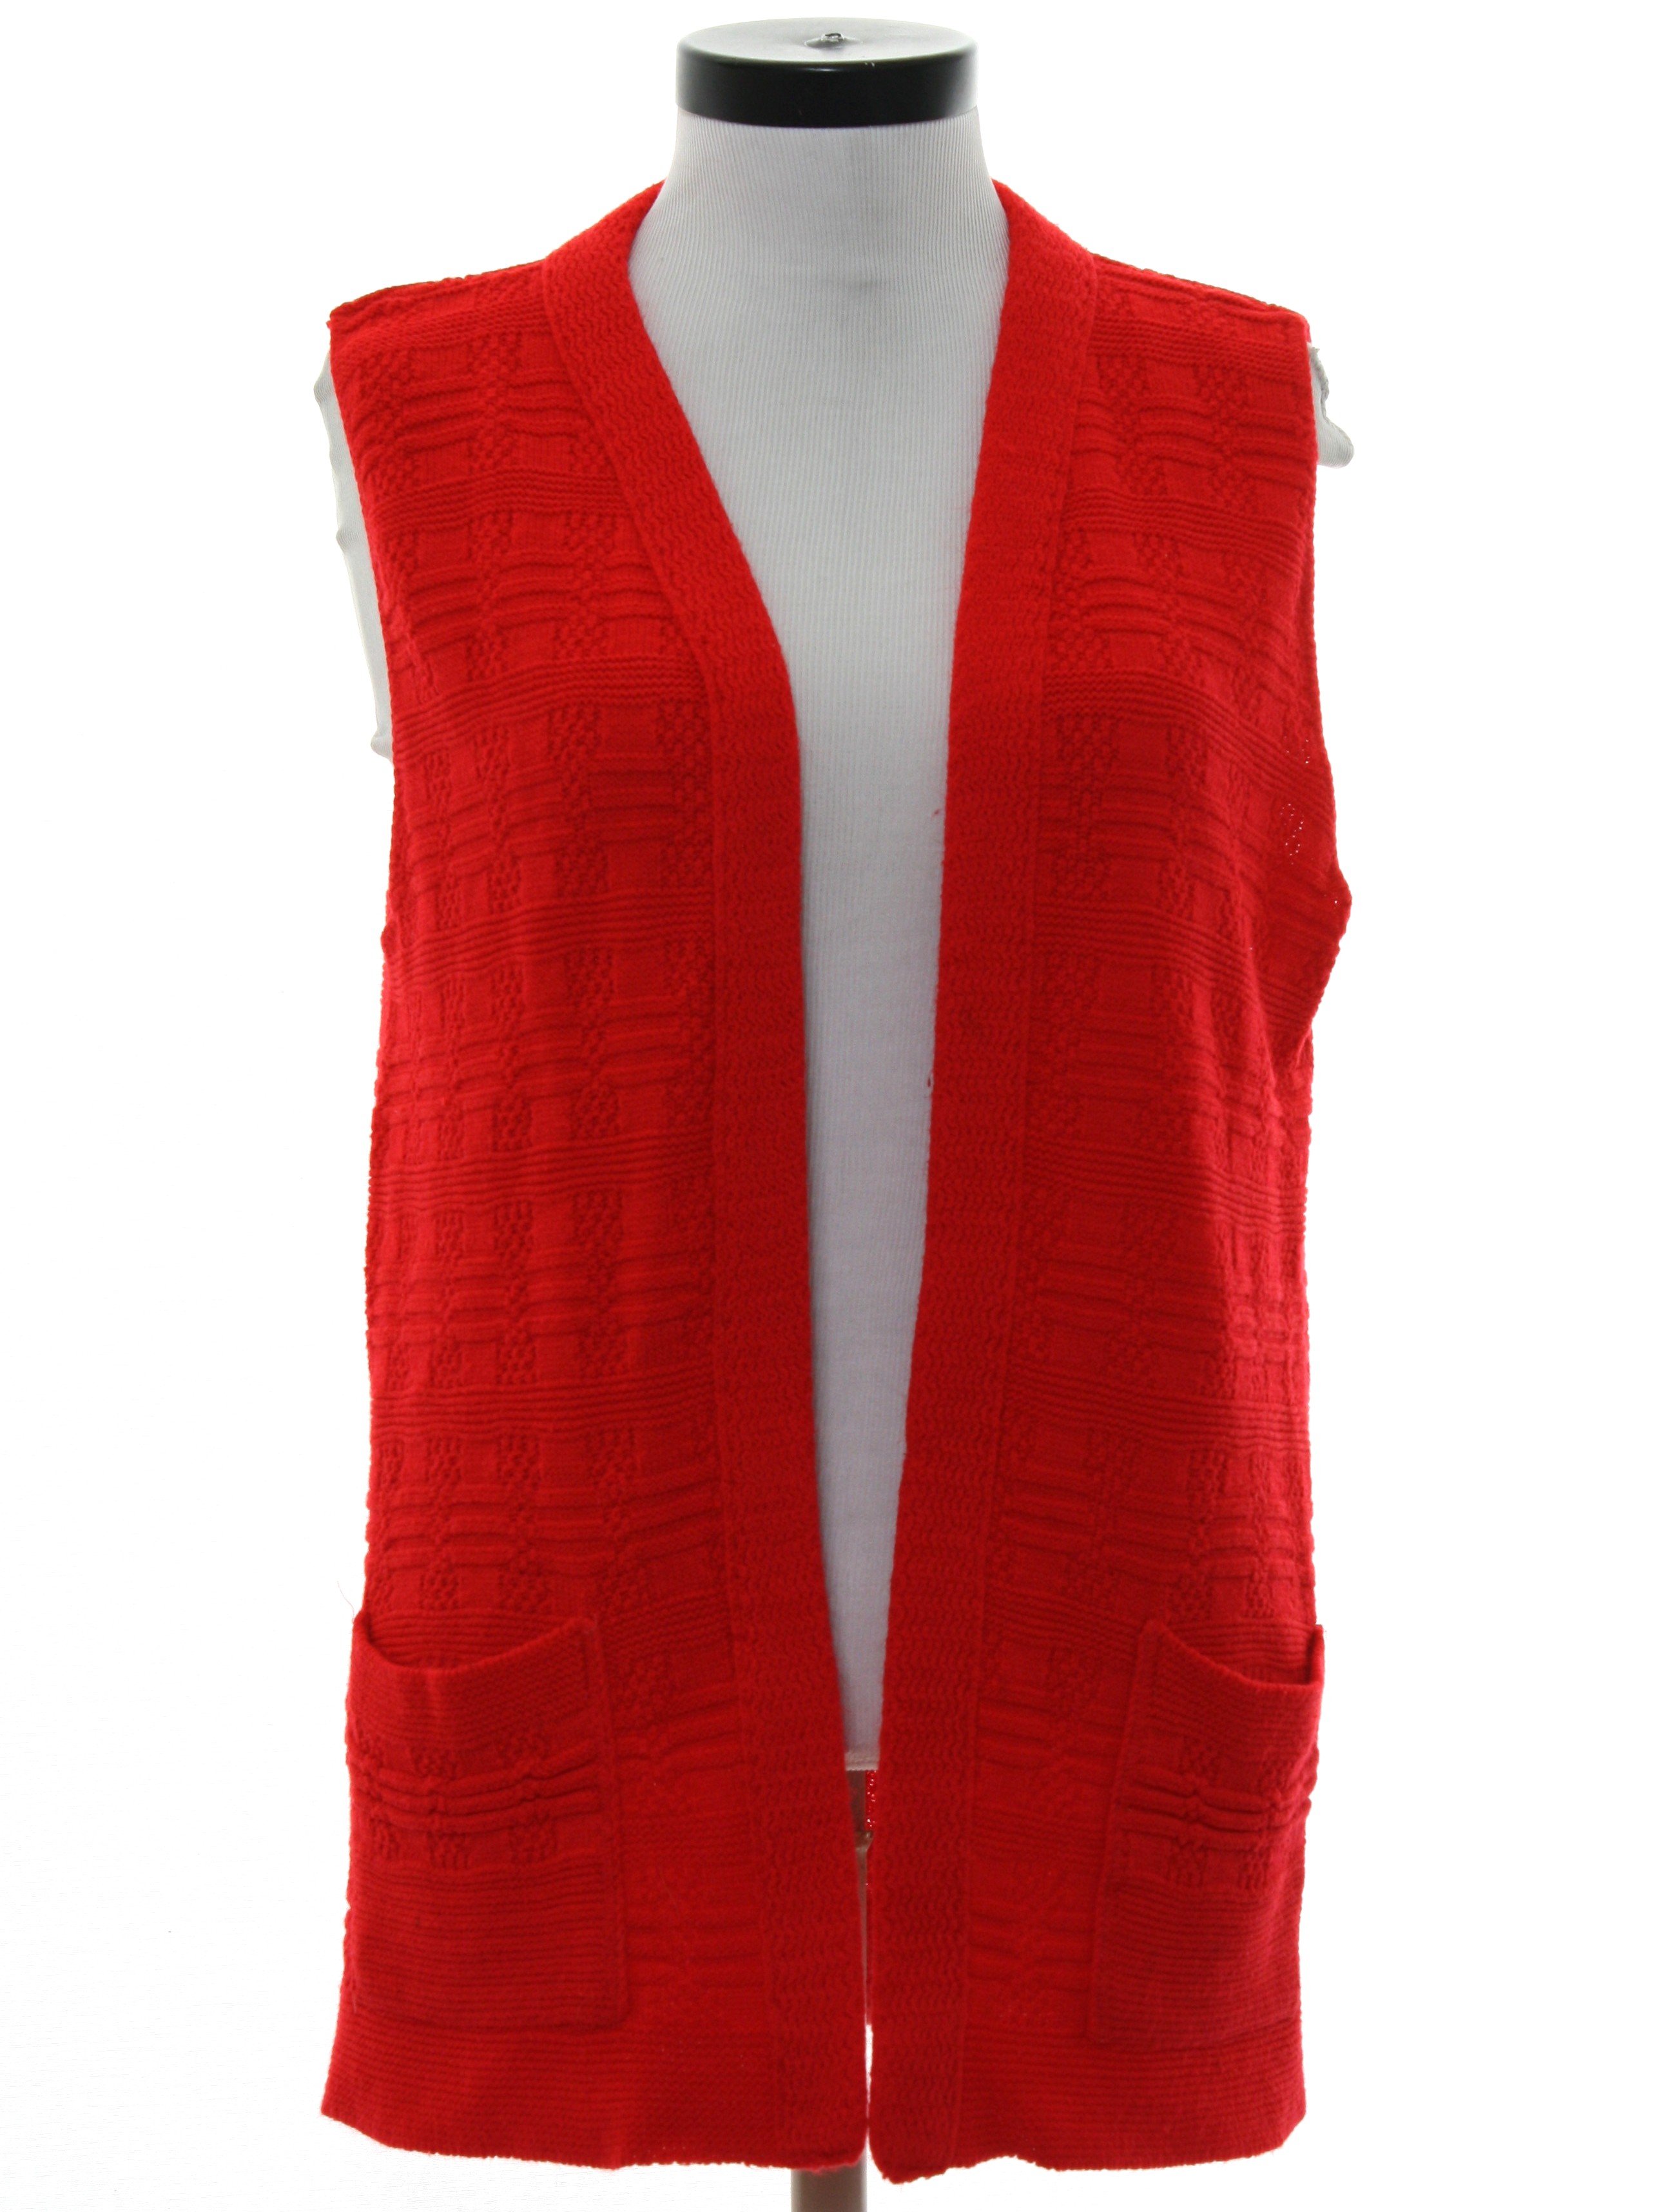 Red sweater vest for ladies club springs